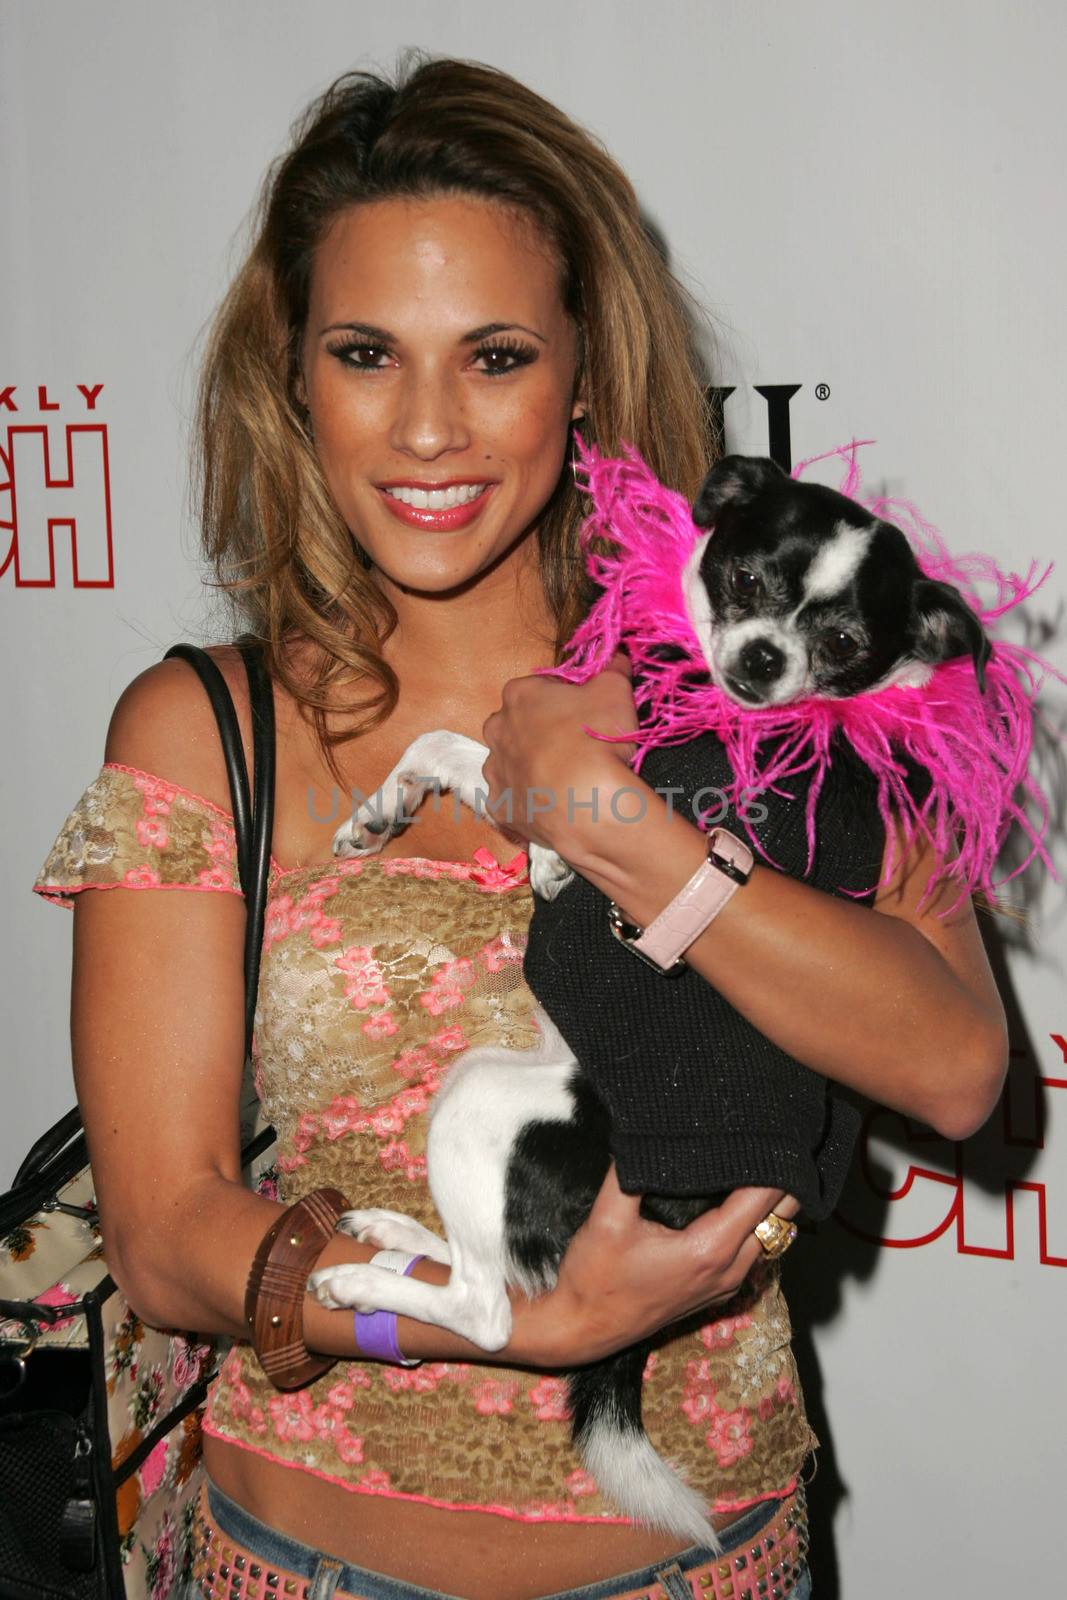 Bonnie-Jill Laflin at the In Touch Presents Pets And Their Stars Party, Cabana Club, Hollywood, CA 09-21-05